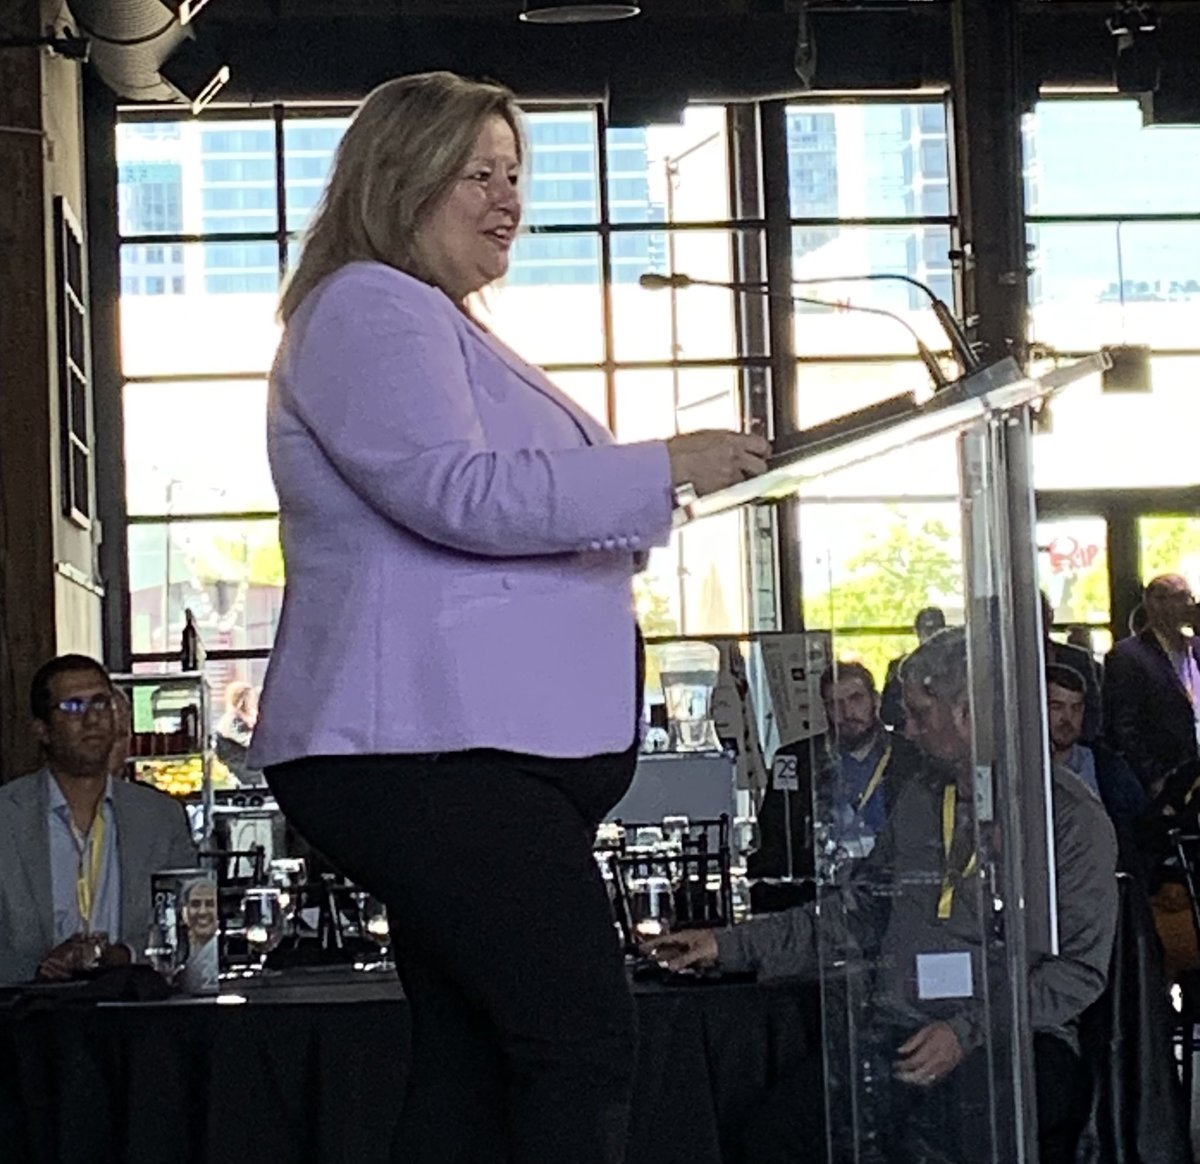 At the FBO conference today, @LisaThompsonPC is bringing attention to:

✔️Safe and stable supply chain
✔️Research & innovation 
✔️Attracting the best talent!

“We need to be loud & proud”

#career #careersinfood #talentattraction